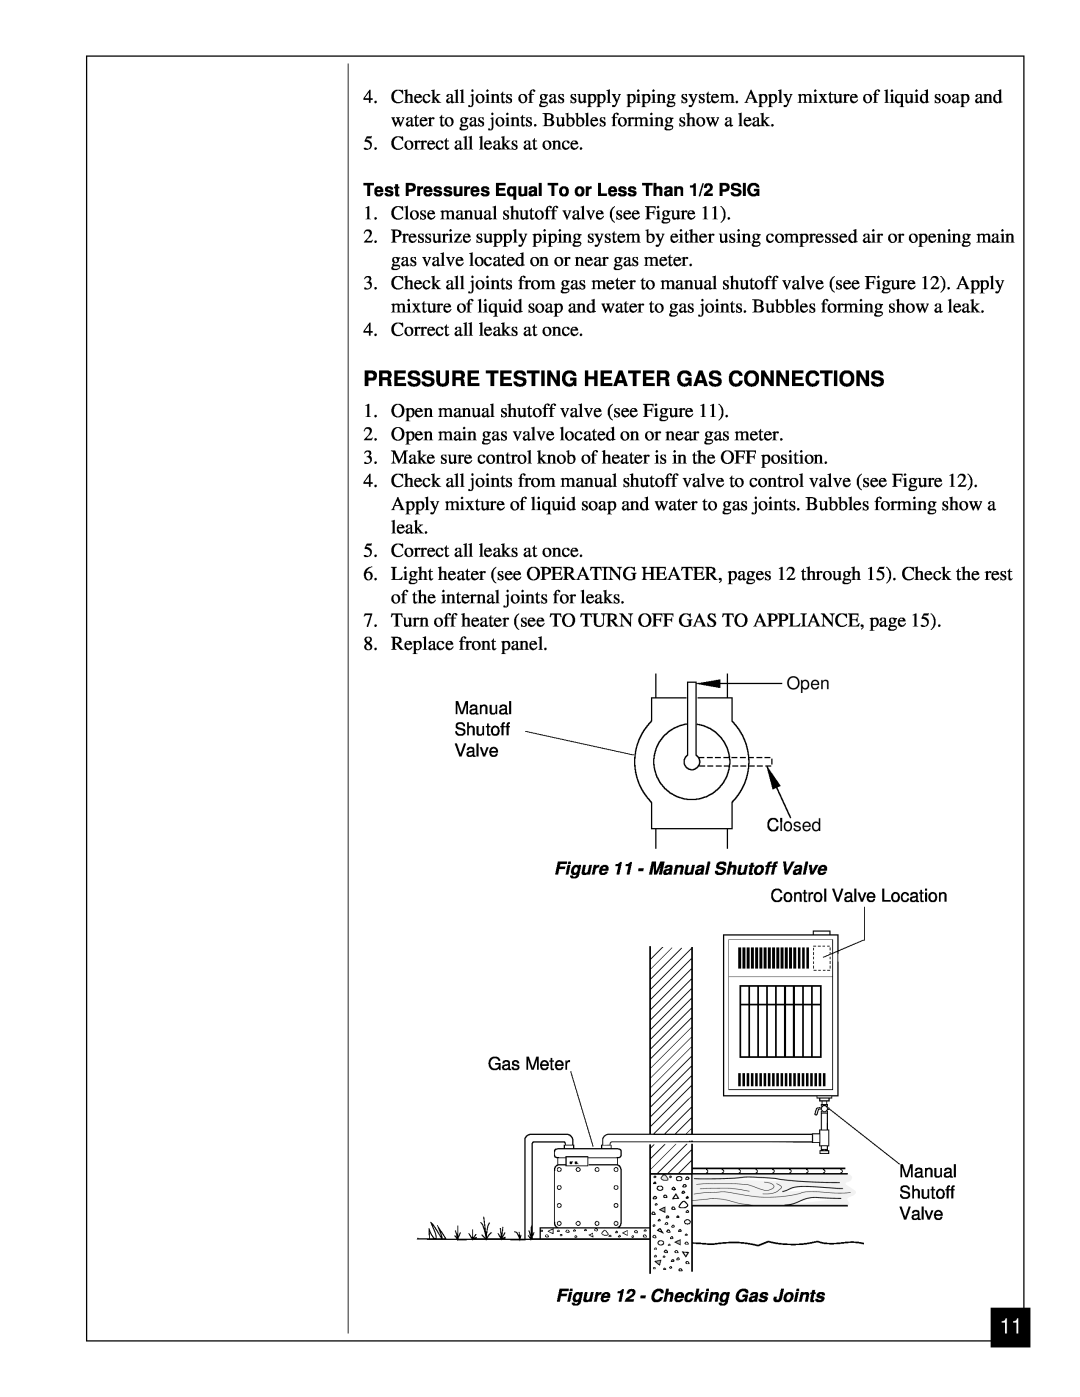 Vanguard Heating VN12, VN6A installation manual Pressure Testing Heater Gas Connections 